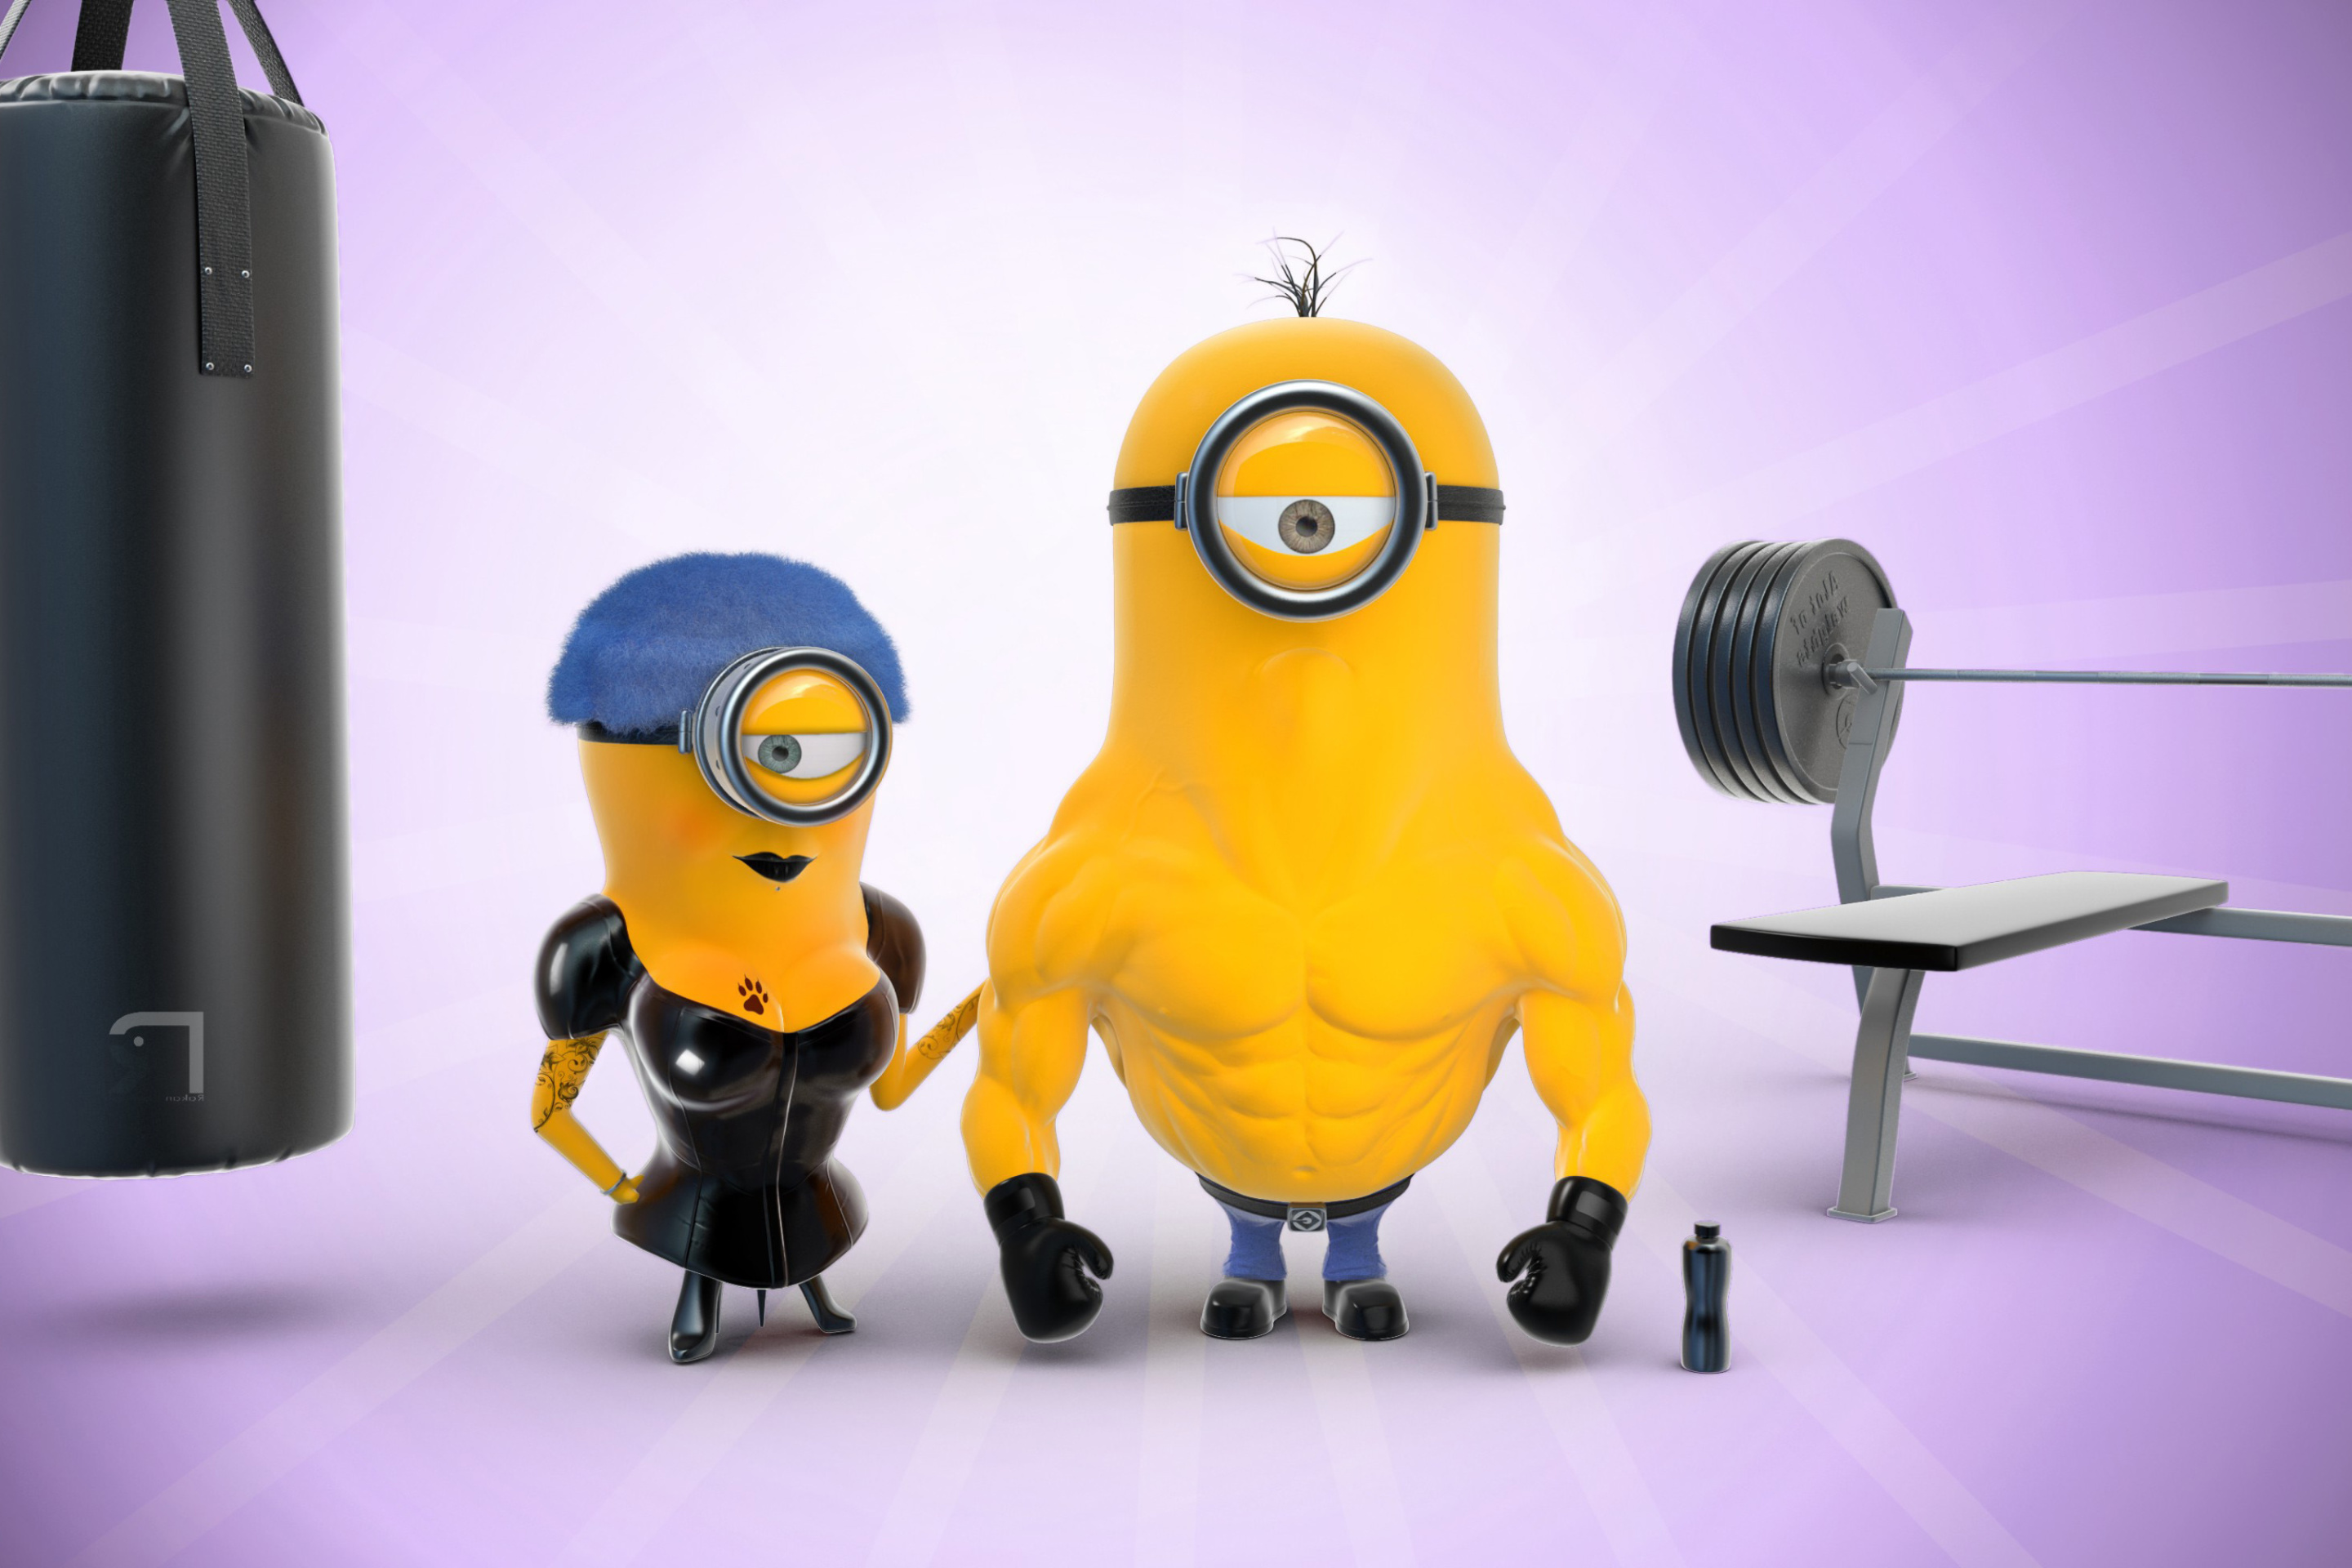 Despicable Me 2 in Gym screenshot #1 2880x1920